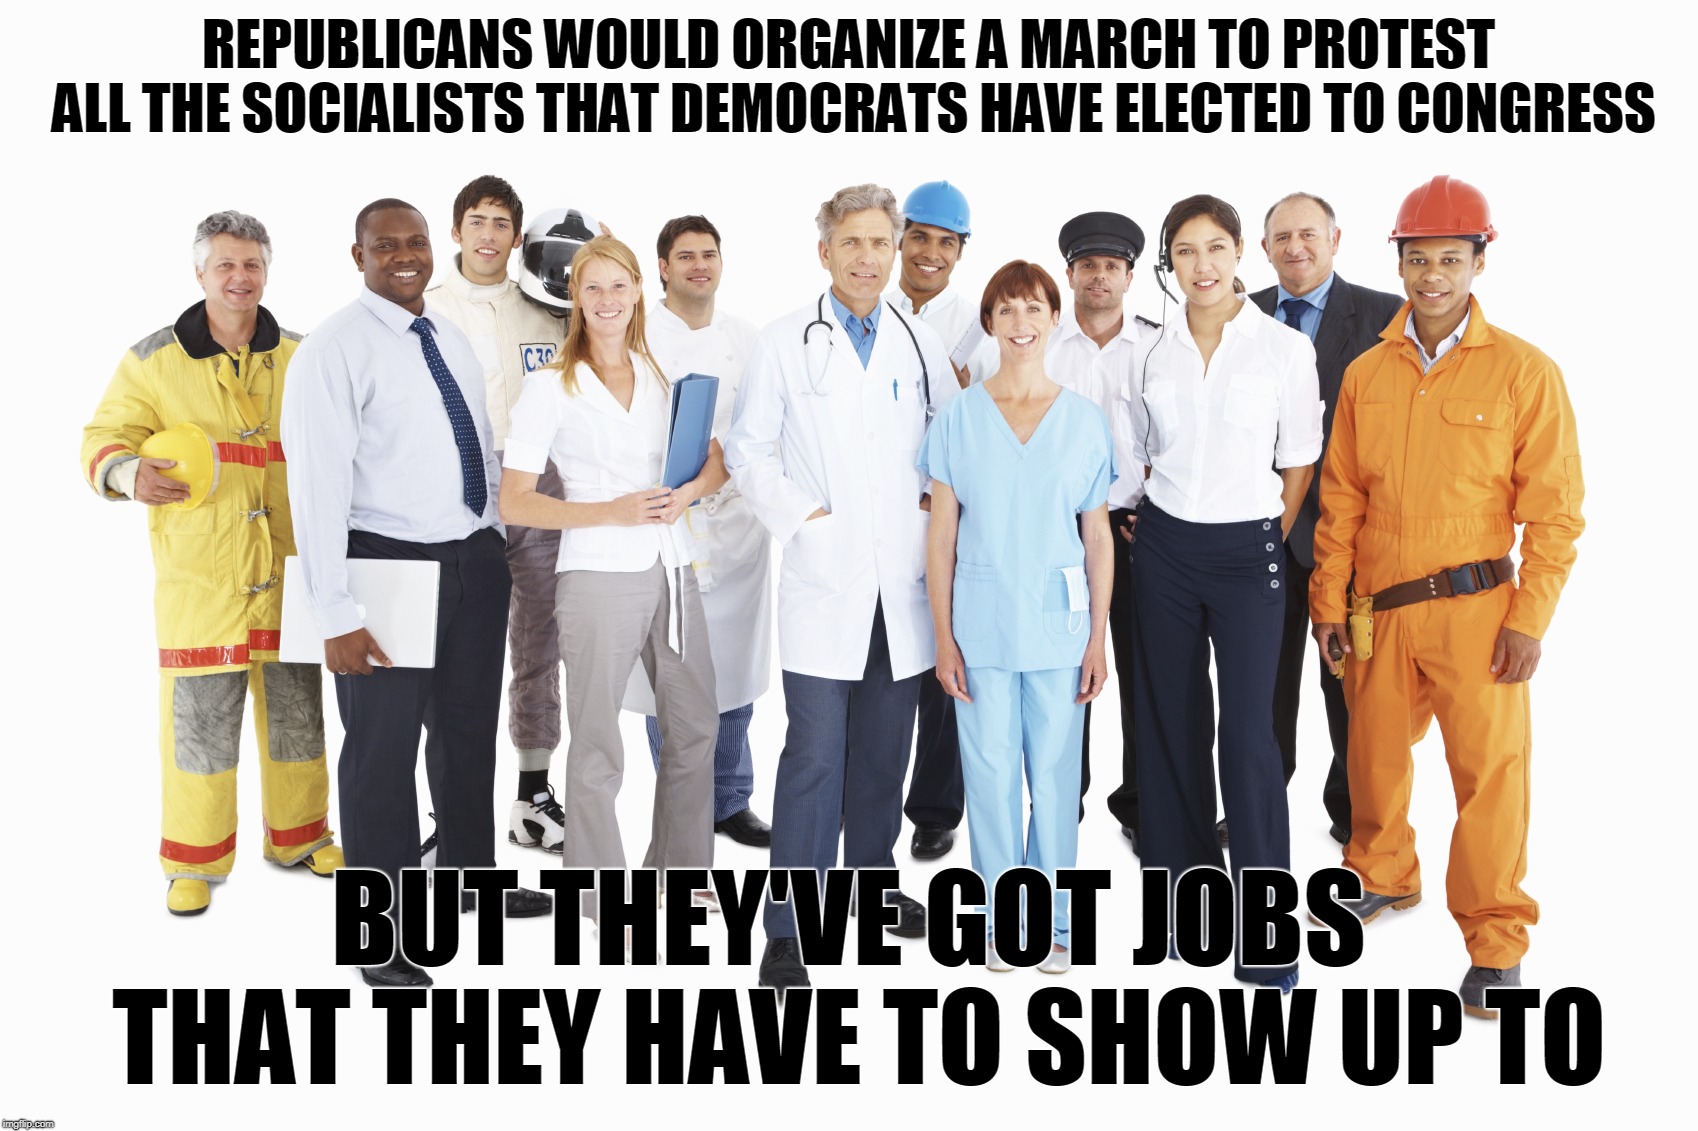 REPUBLICANS WOULD ORGANIZE A MARCH TO PROTEST ALL THE SOCIALISTS THAT DEMOCRATS HAVE ELECTED TO CONGRESS; BUT THEY'VE GOT JOBS THAT THEY HAVE TO SHOW UP TO | image tagged in political meme,republicans,democrats,socialism,march | made w/ Imgflip meme maker